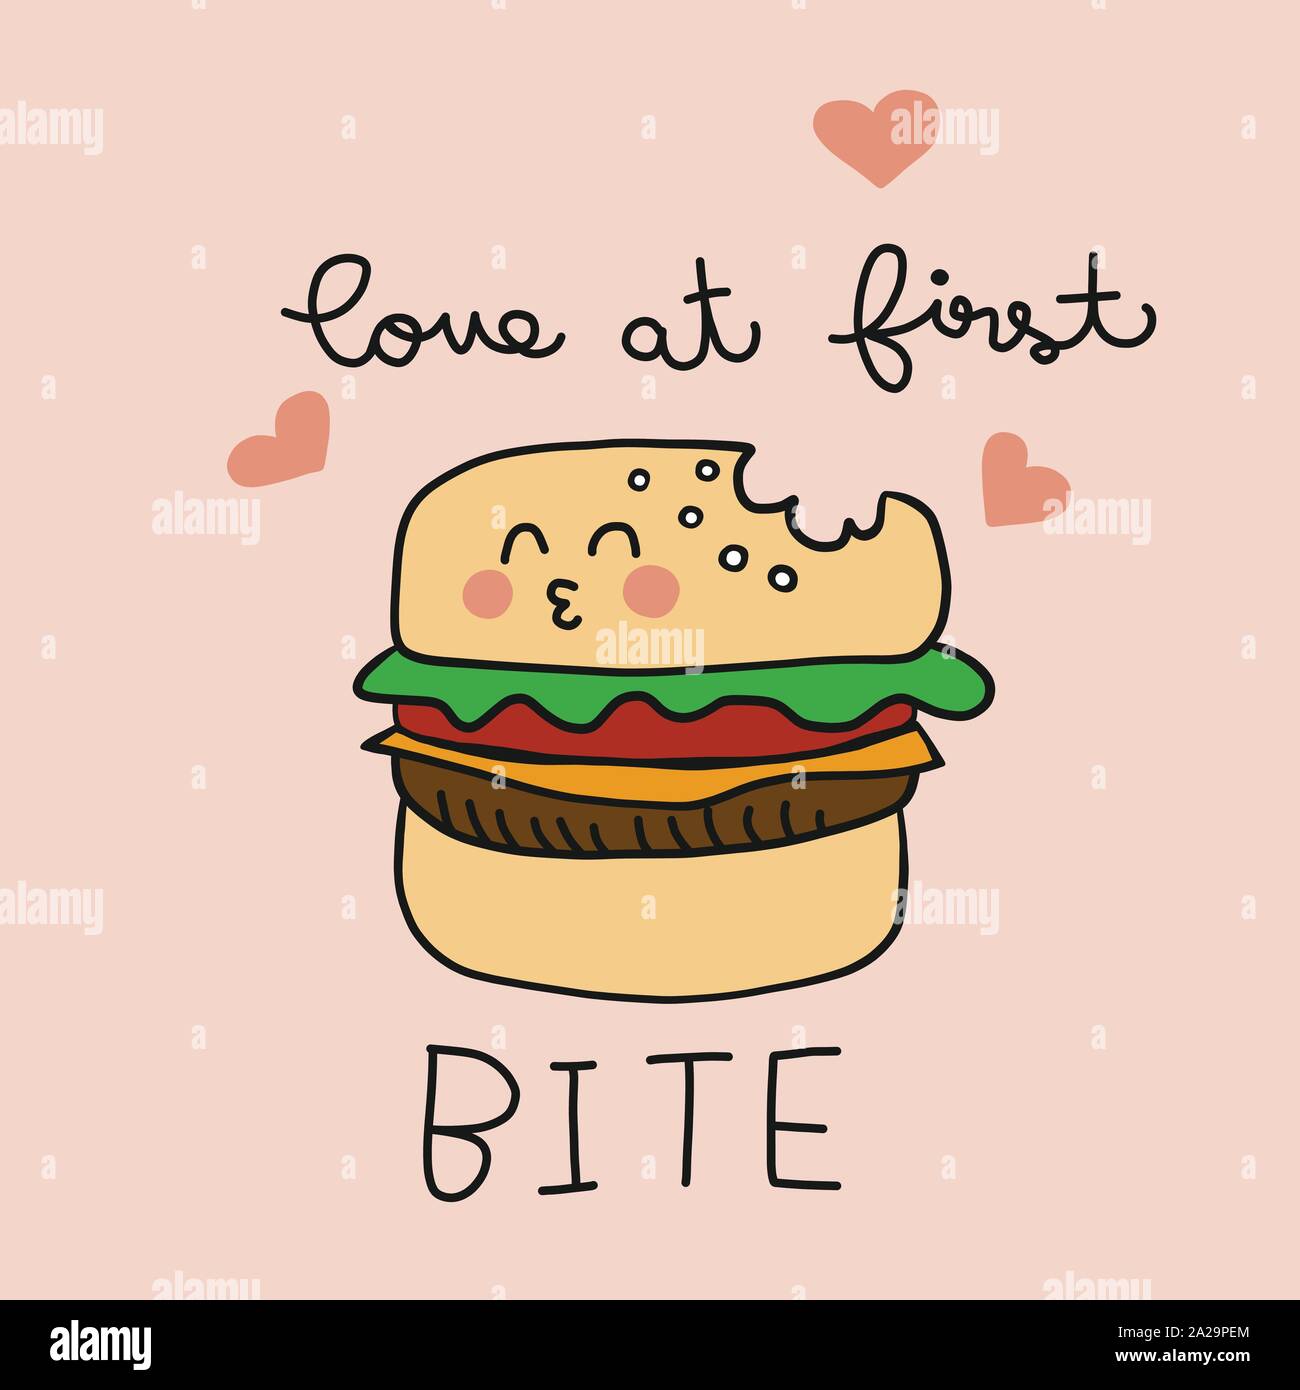 Love at first bite cute burger cartoon vector illustration doodle style Stock Vector